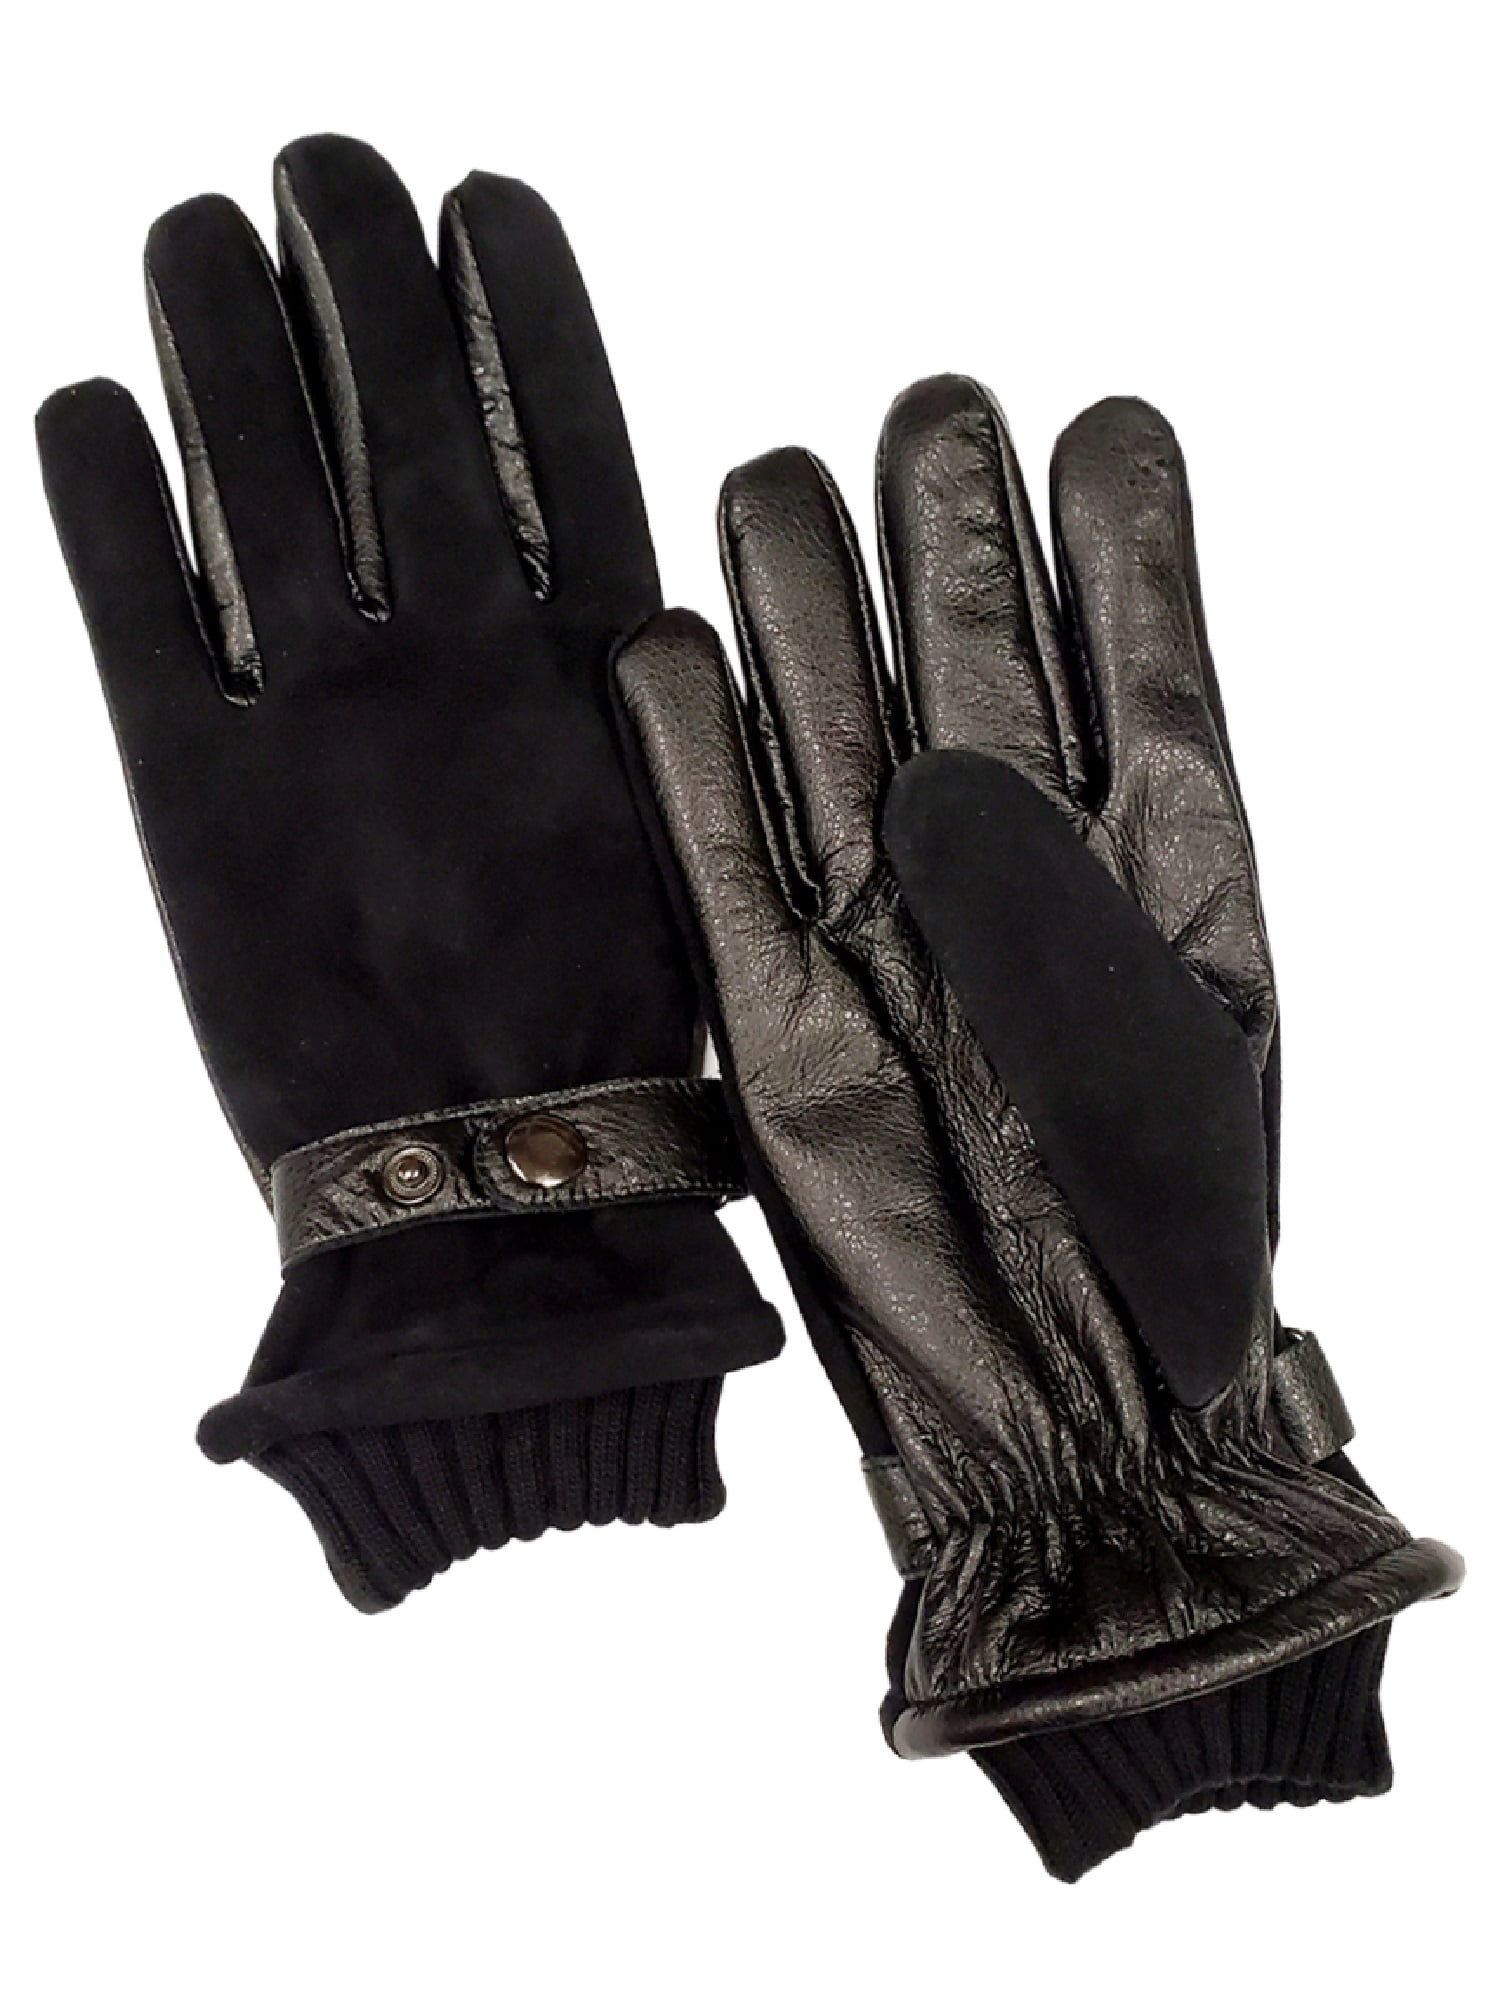 Liveinu Mens Genuine Leather Touchscreen Texting Gloves Winter Driving Warm Lining Gloves